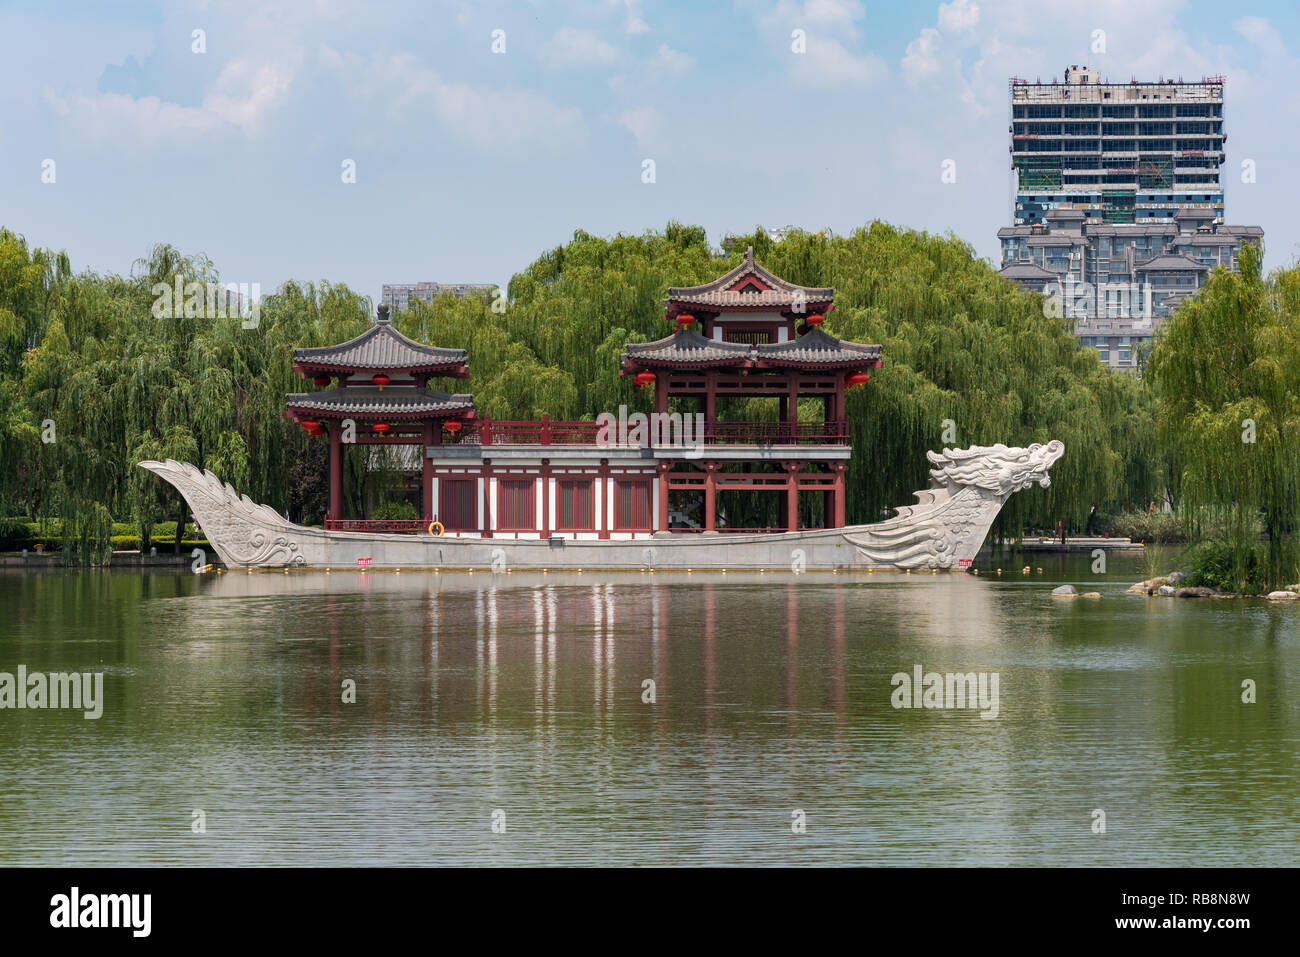 Xi'an, Shaanxi province, China - Aug 12, 2018 : Pagoda on a stone boat with dragon sculptures in Tang paradise park. Stock Photo